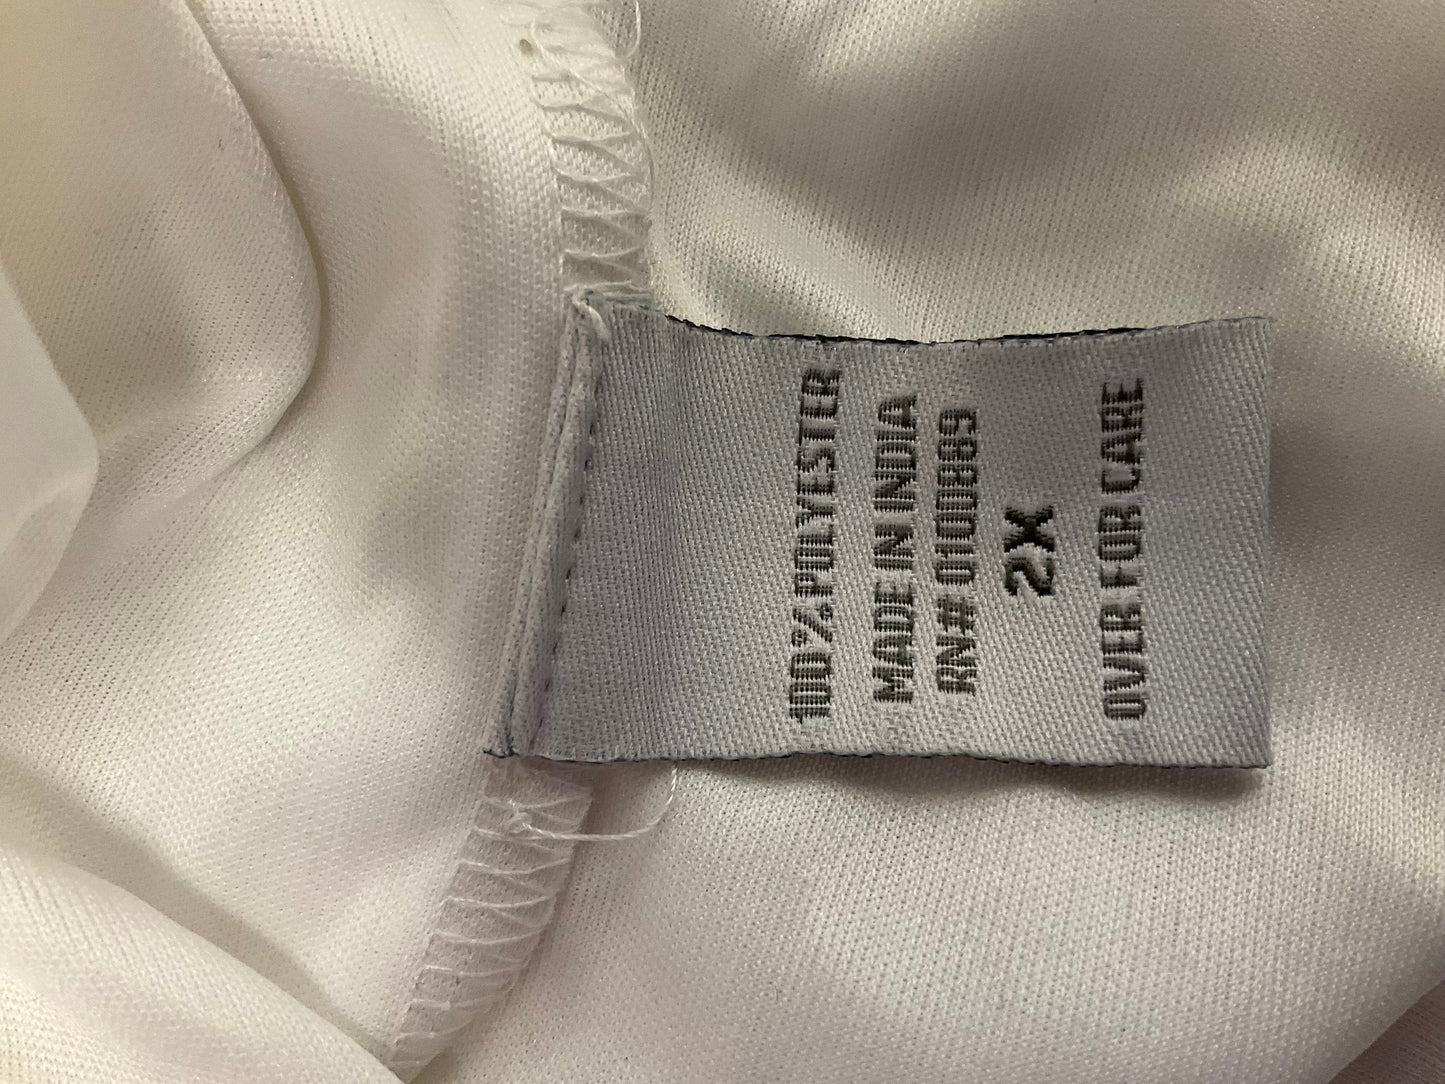 White Top 3/4 Sleeve Clothes Mentor, Size 2x